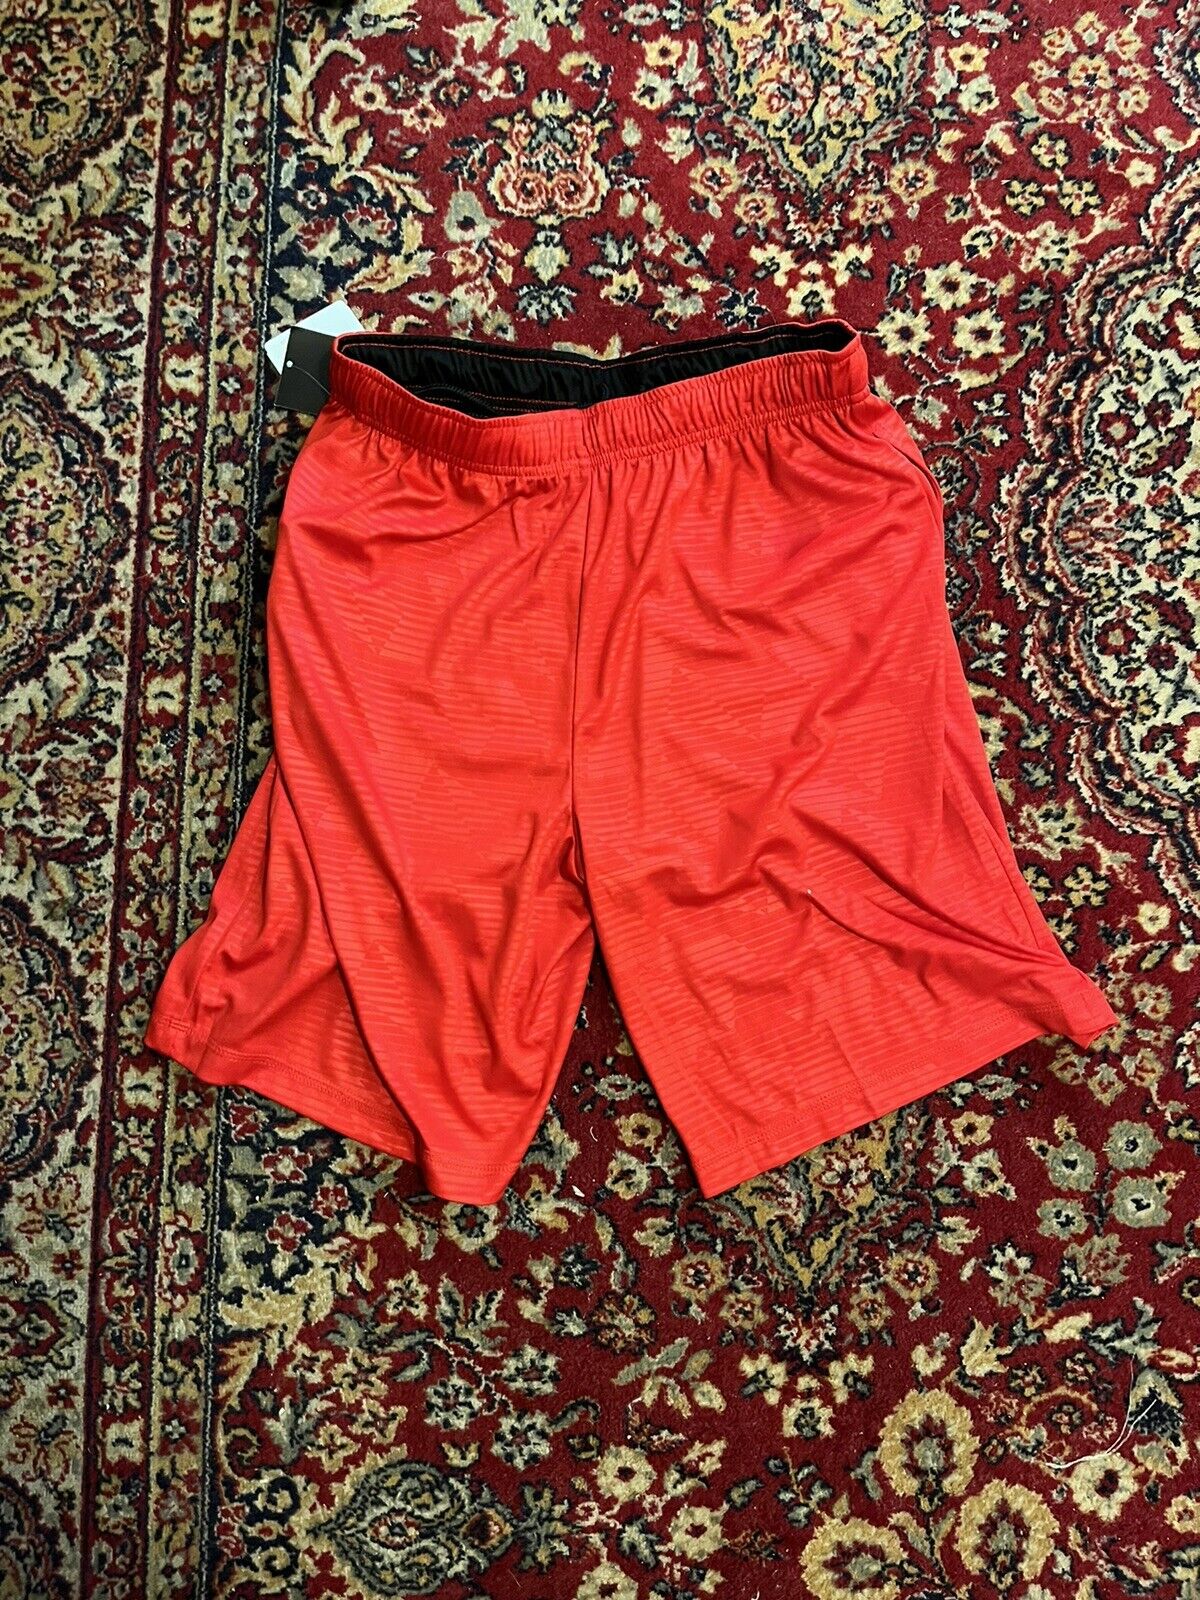 NEW Louisville Cardinals LofU Draw String Pockets Athletic Shorts Red Men's  L